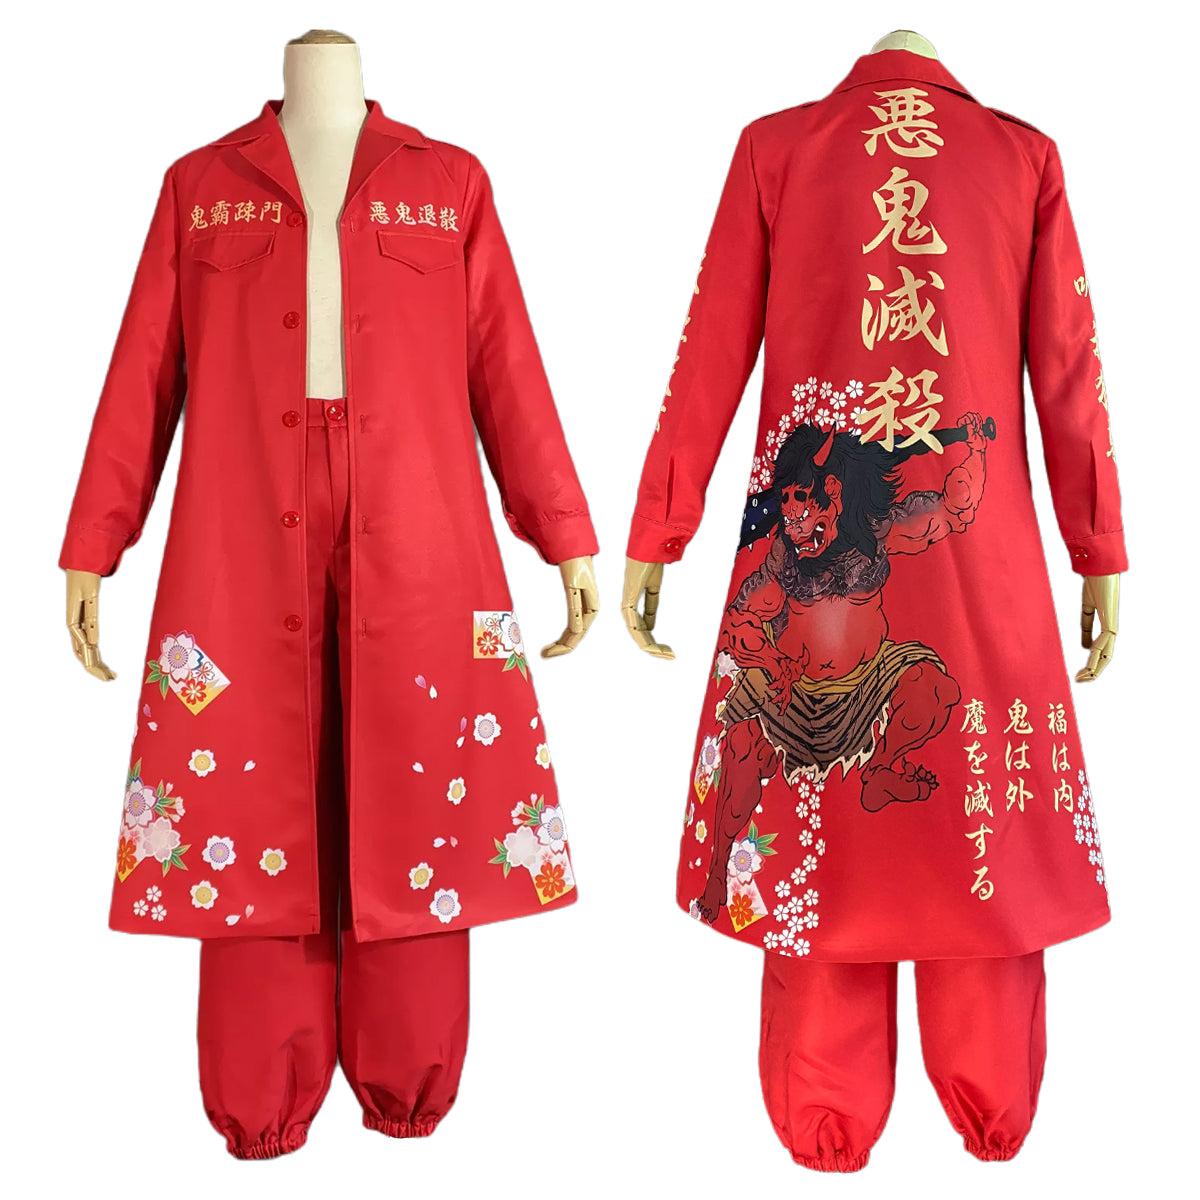 HOLOUN Bosozoku Cosplay Costume Special Attack Red Color Uniform Coat Chinese Characters Japanese Festival Halloween Christmas New Year Gift